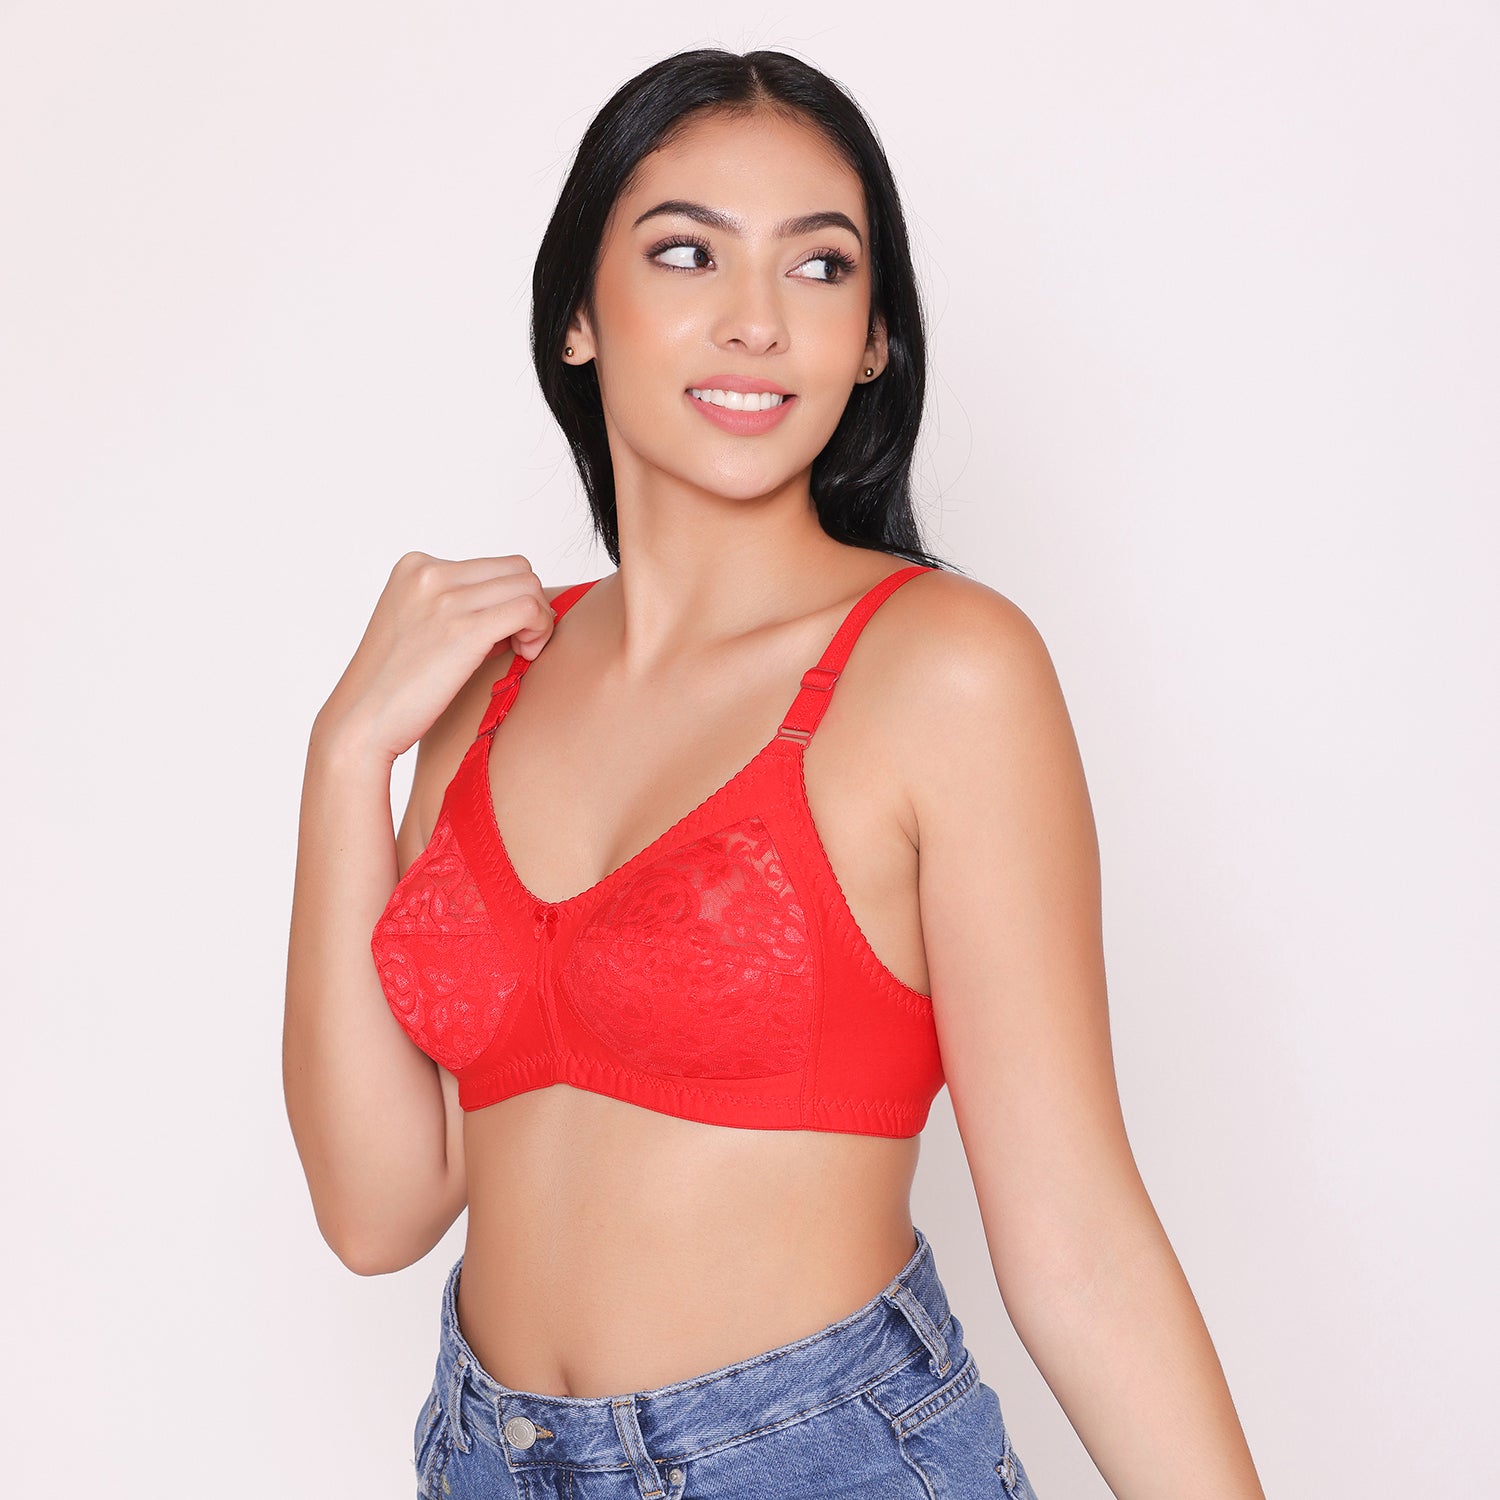  Womens Balconette Bra Plus Size Full Coverage Tshirt  Seamless Underwire Bras Back Smoothing Red Revelry 36C